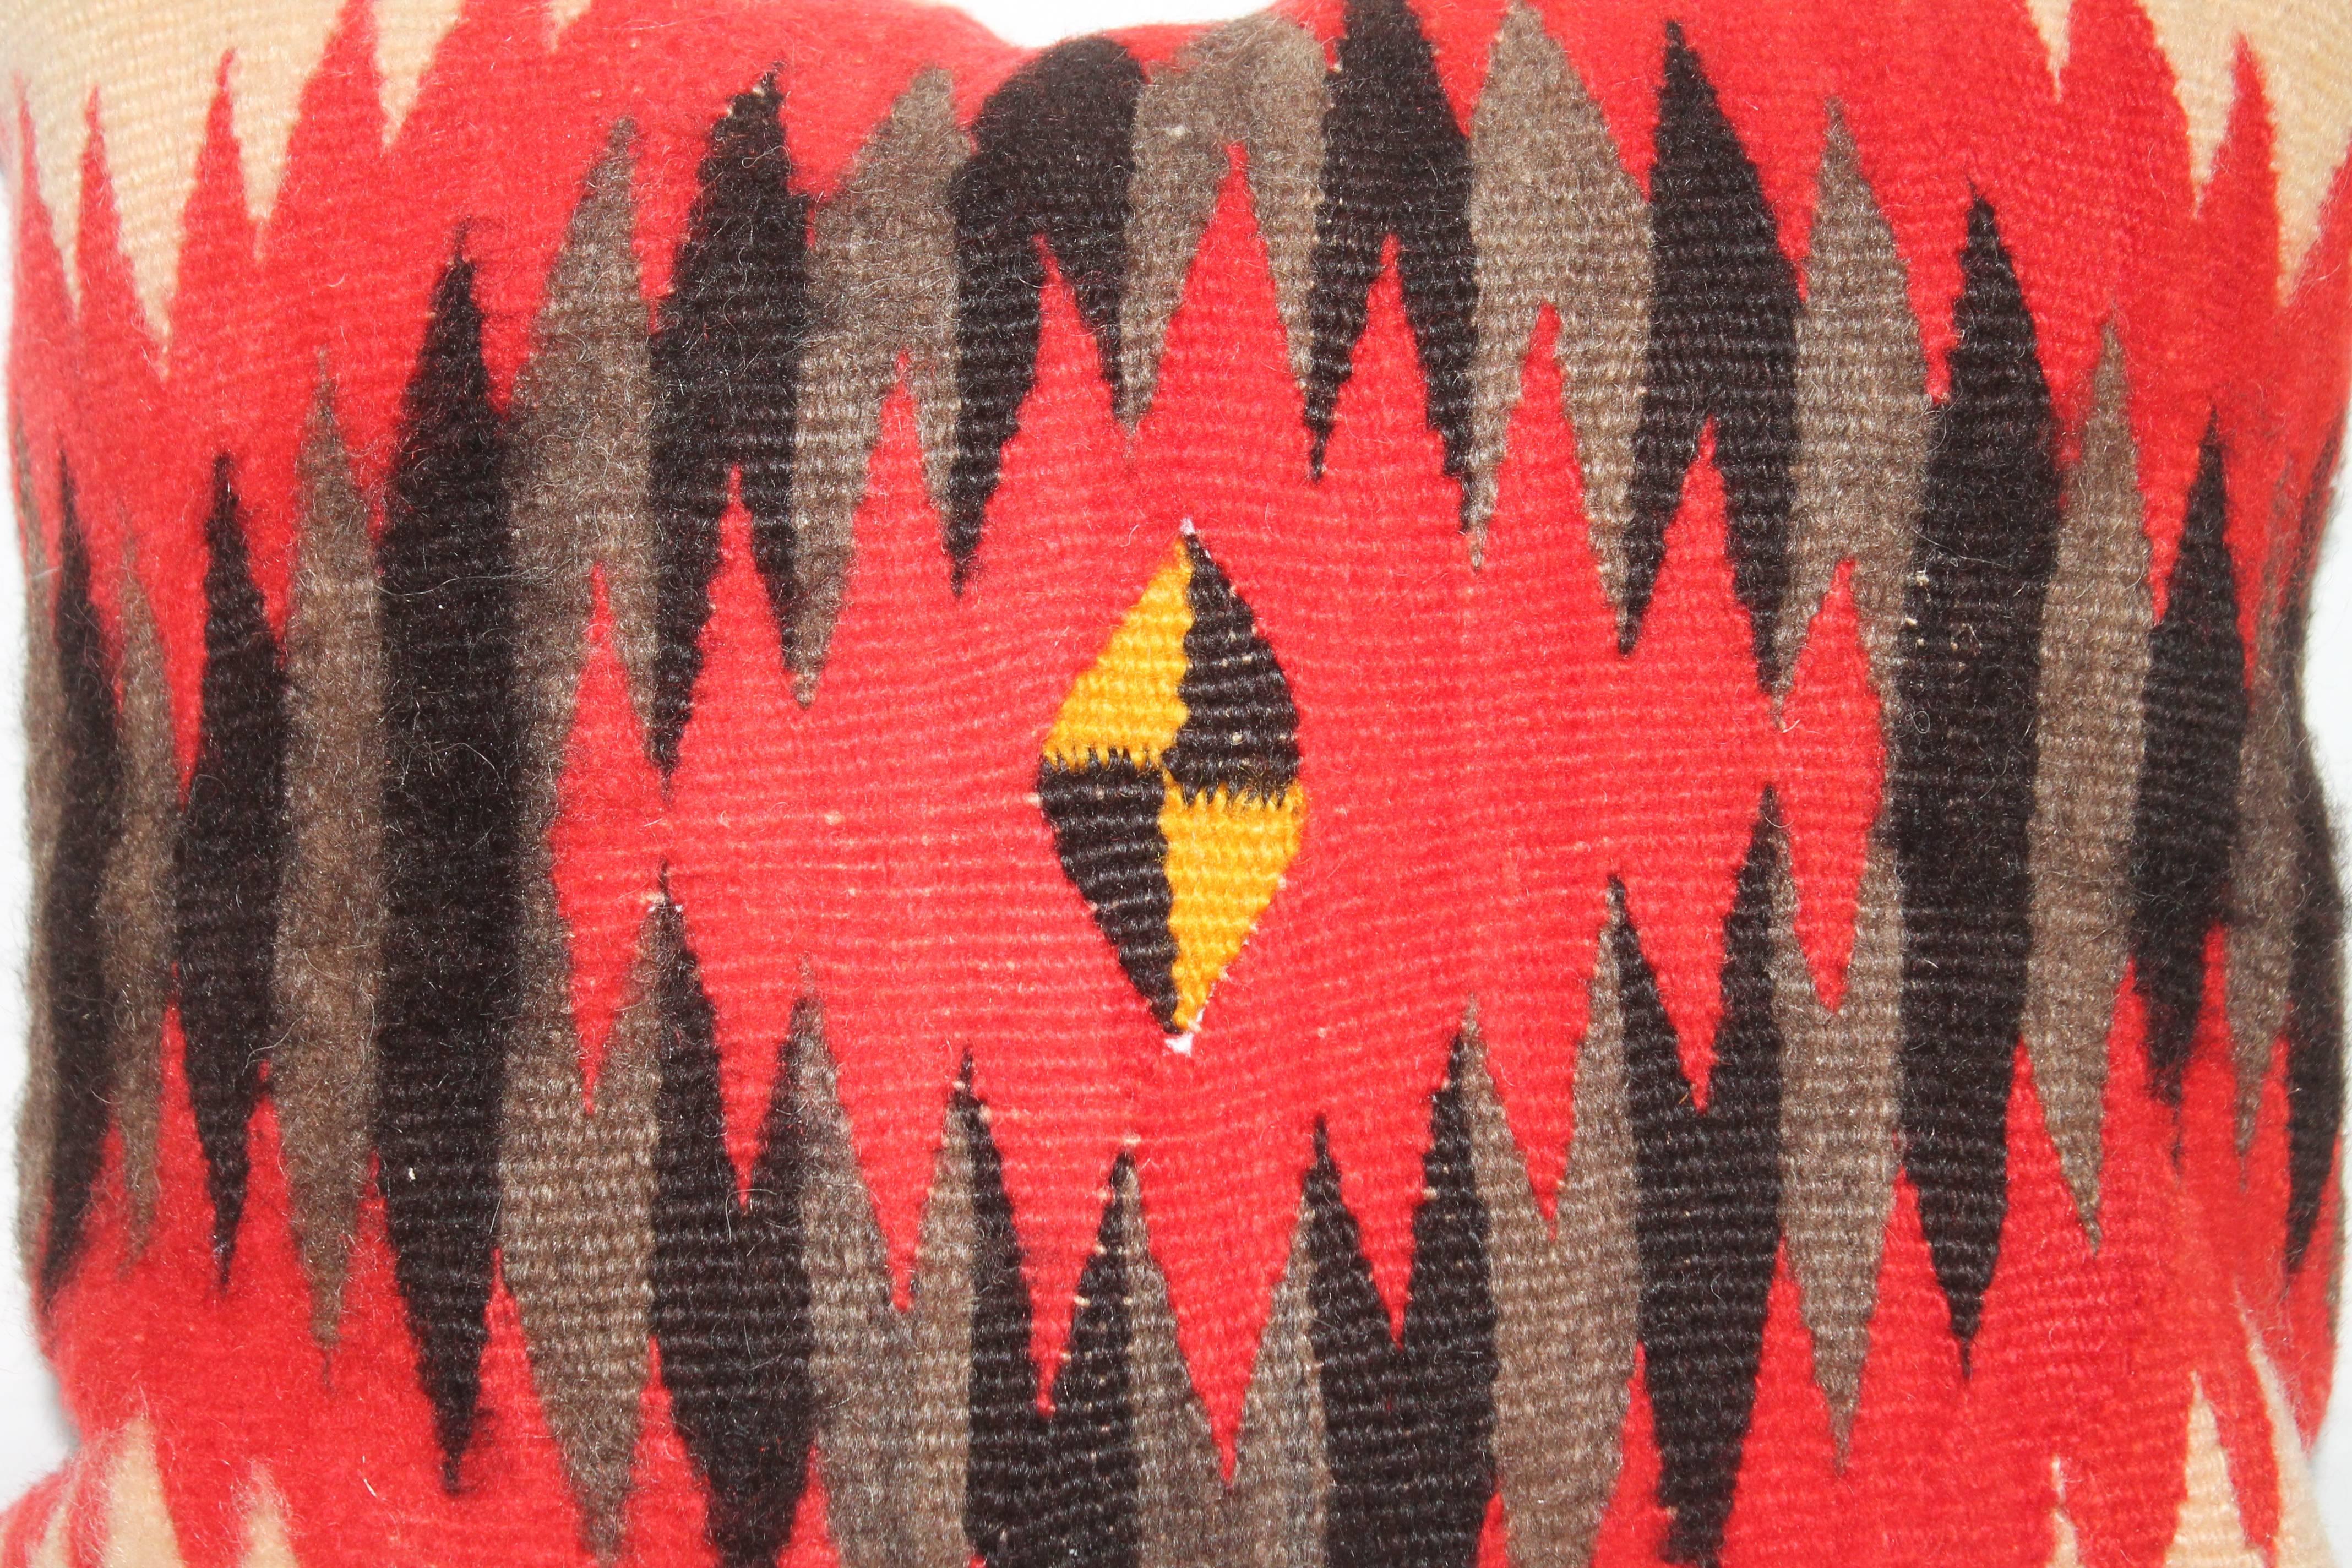 This early 1900 Navajo weaving eye dazzler is in fine condition with a soft aged Alpaca wool feeling. This interesting pattern looks like a seeing eye design.